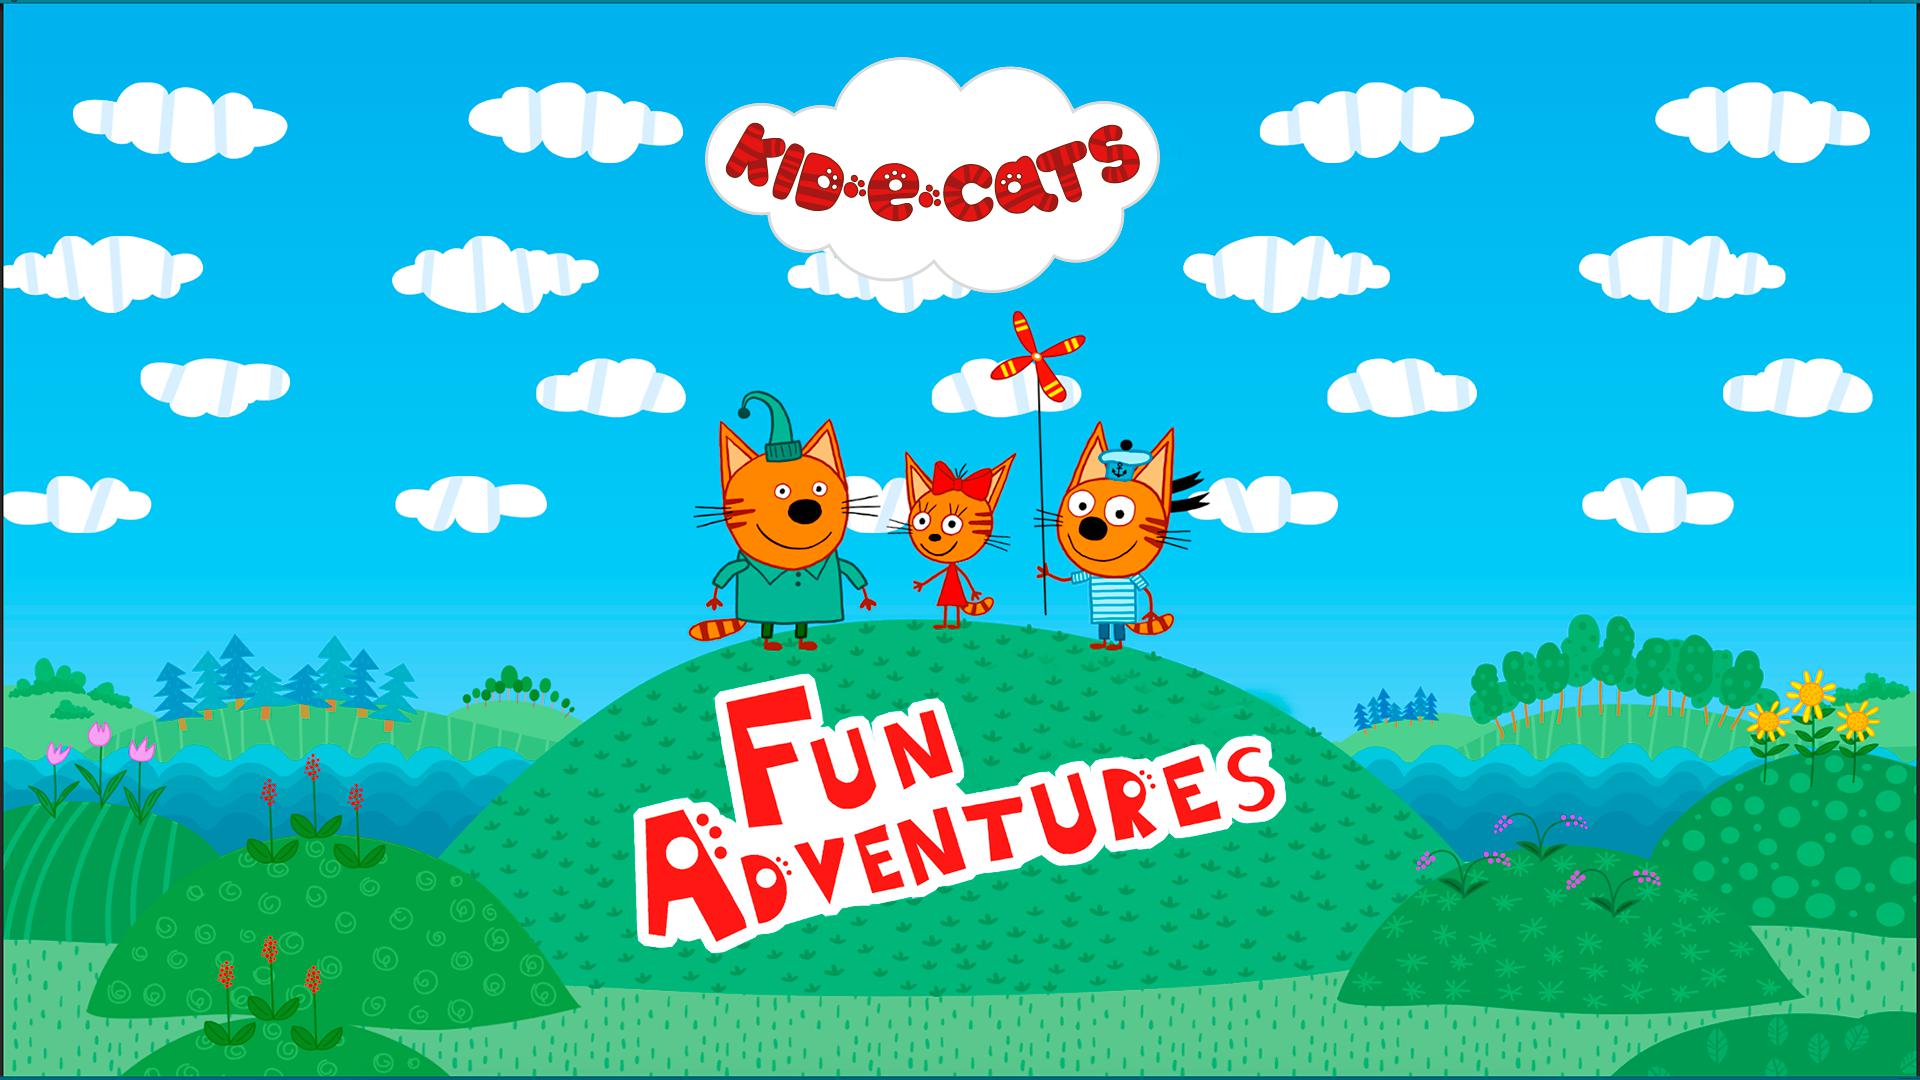 Kid-E-Cats Fun Adventures and Games for Kids